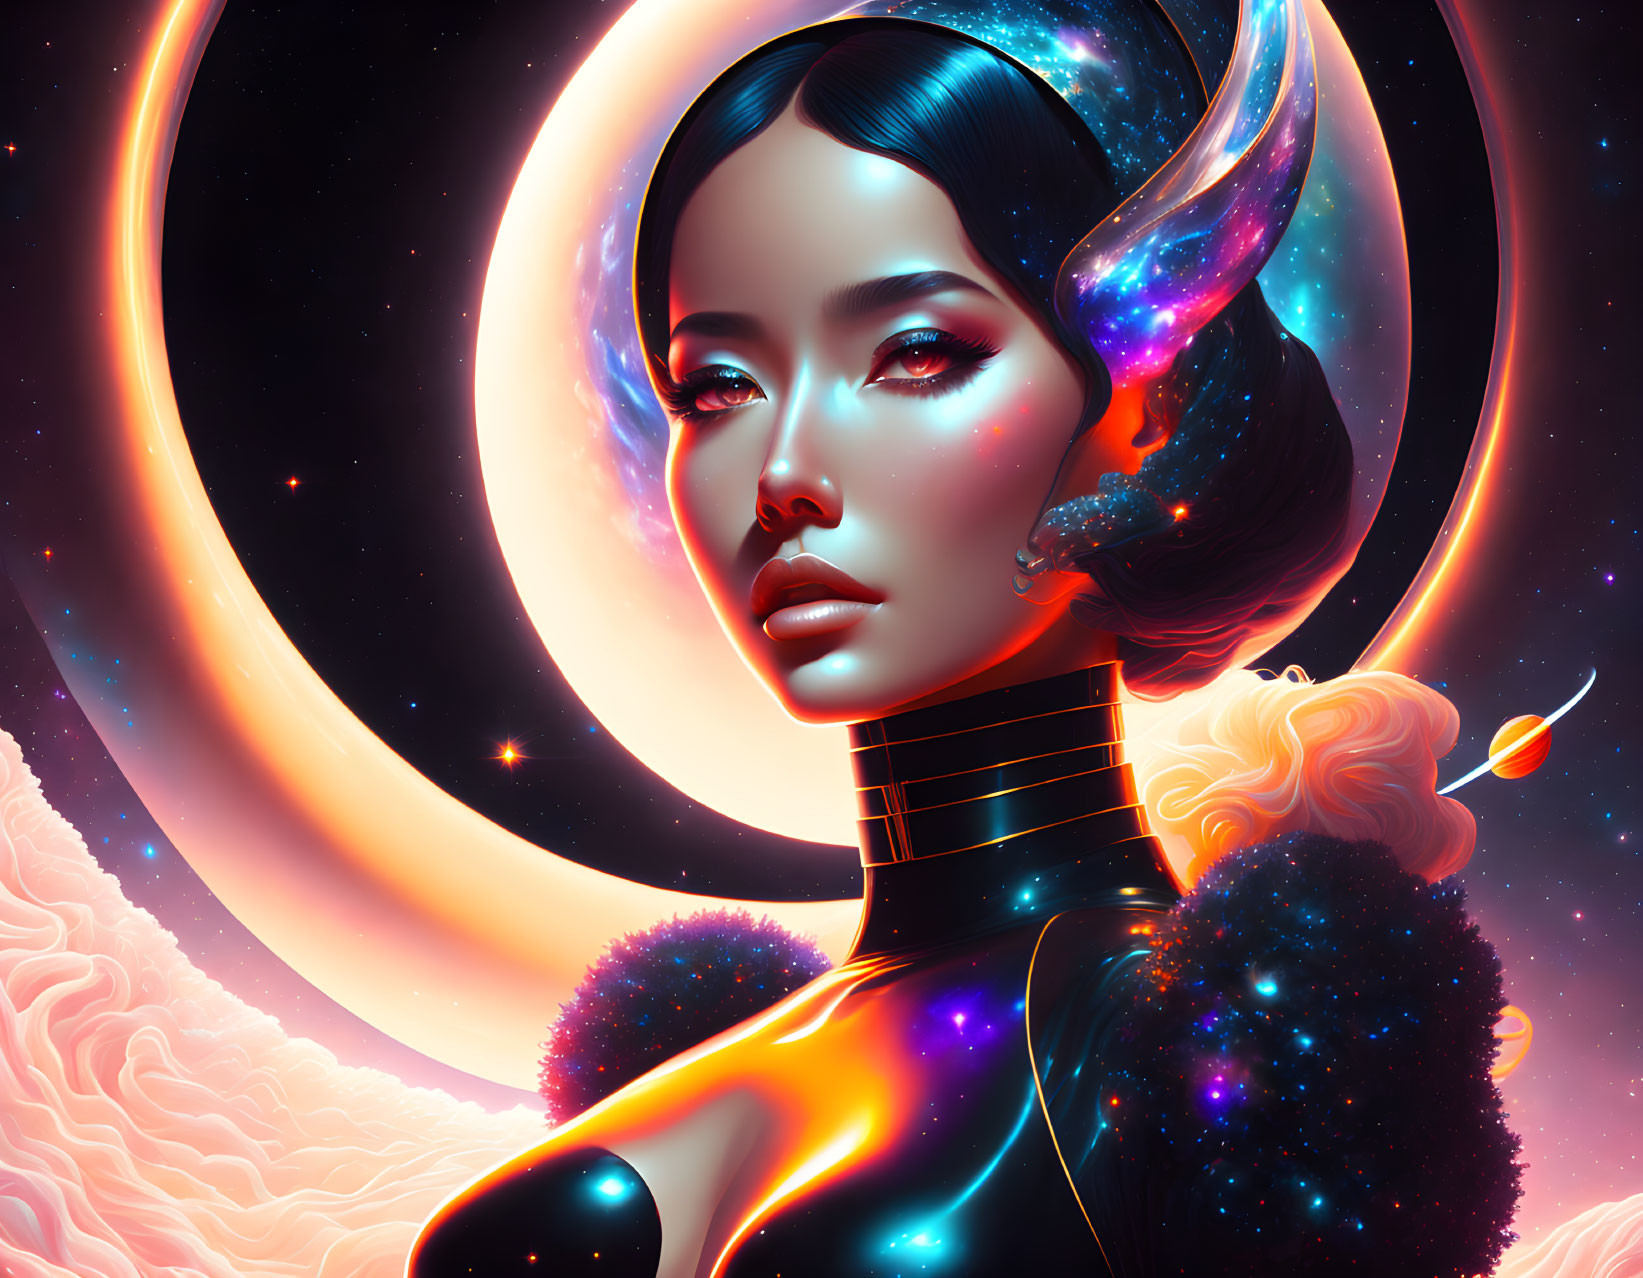 Colorful Futuristic Portrait of Woman with Cosmic Theme